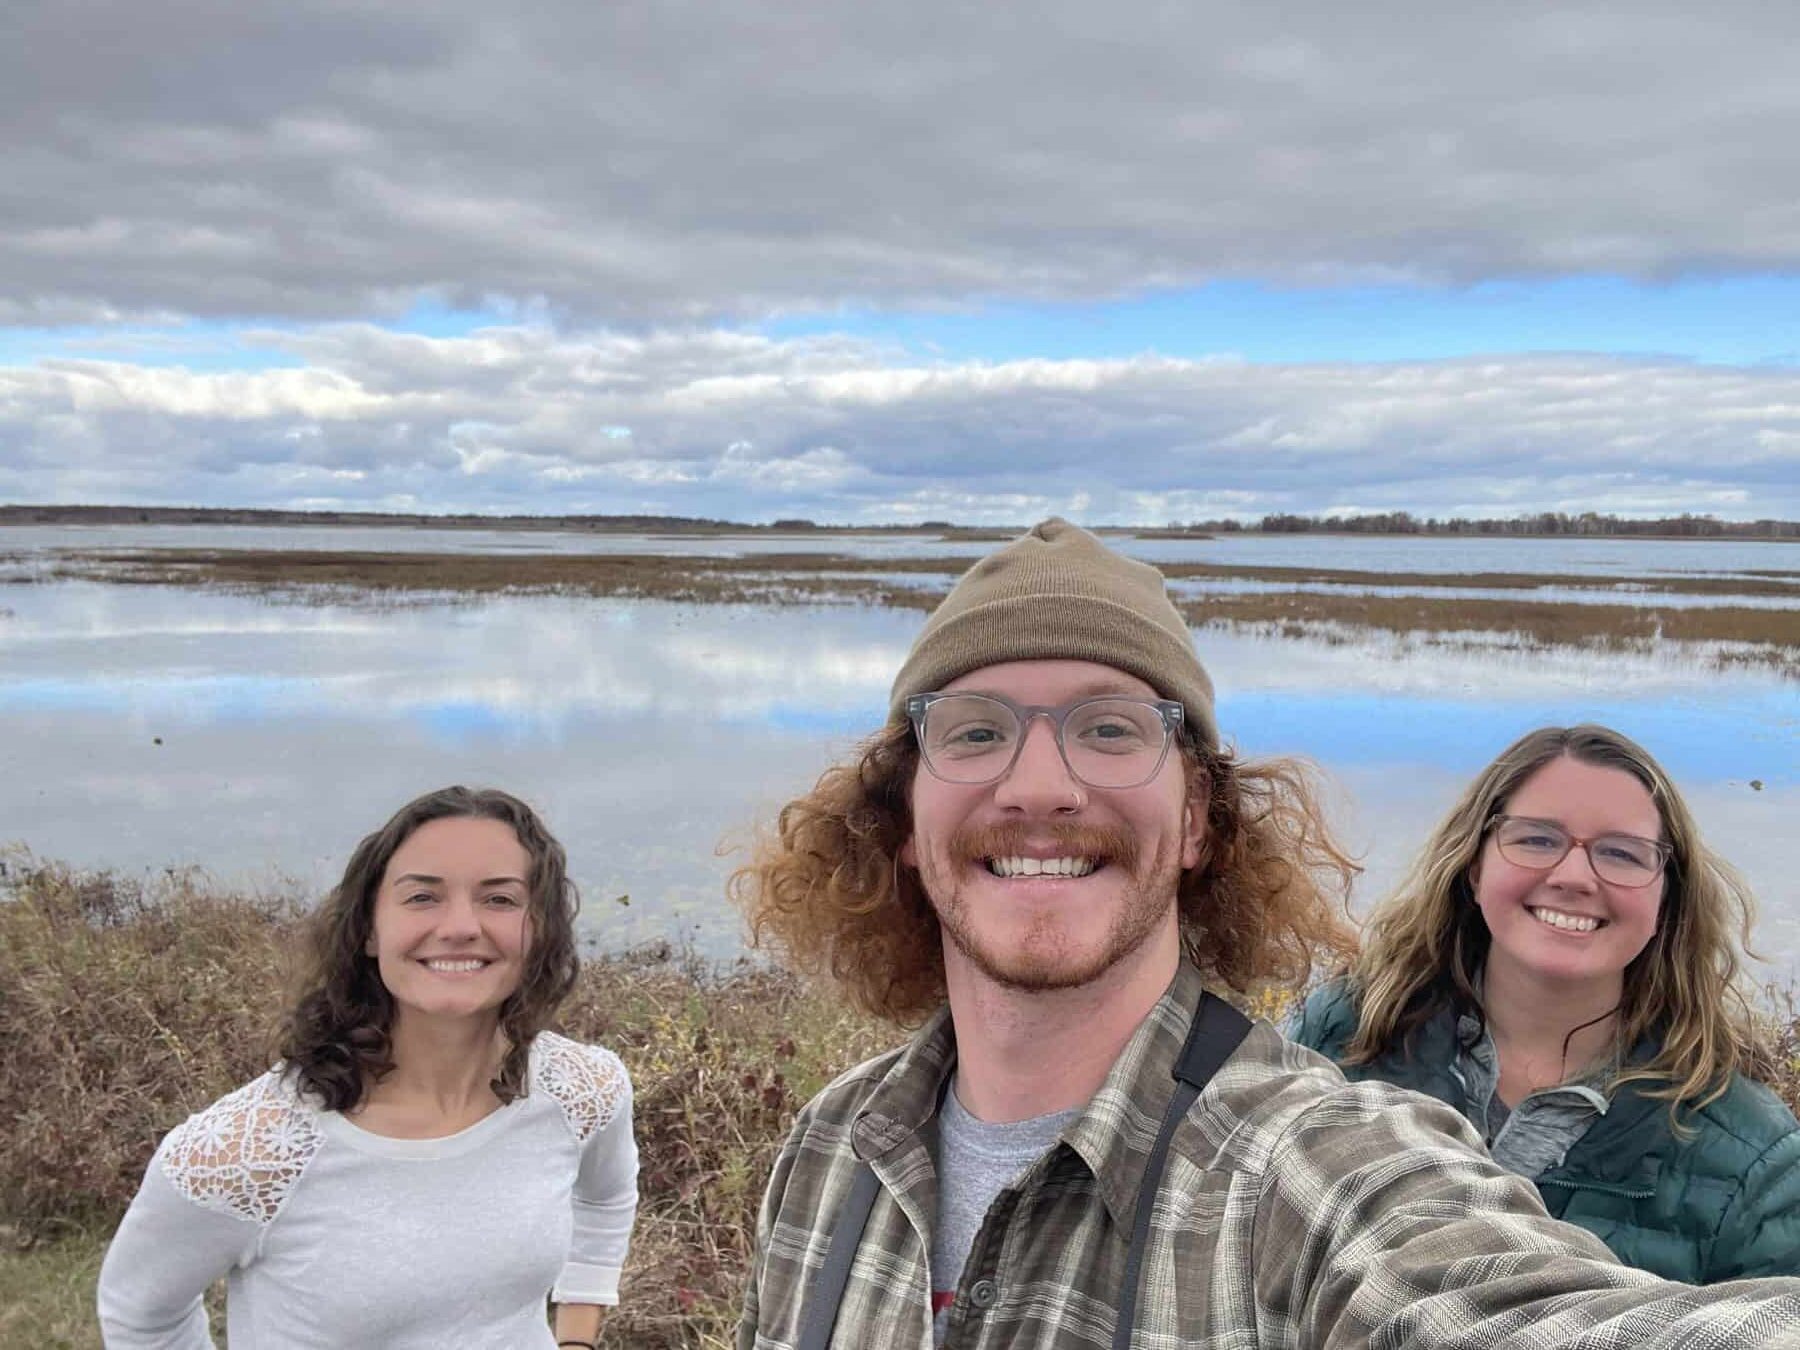 Wild River Conservancy's River Connections Team, L-R: Nicole Biagi (Outdoor Educator), Jeremiah Walters (Naturalist), Wendy Tremblay (Community Engagement Coordinator)